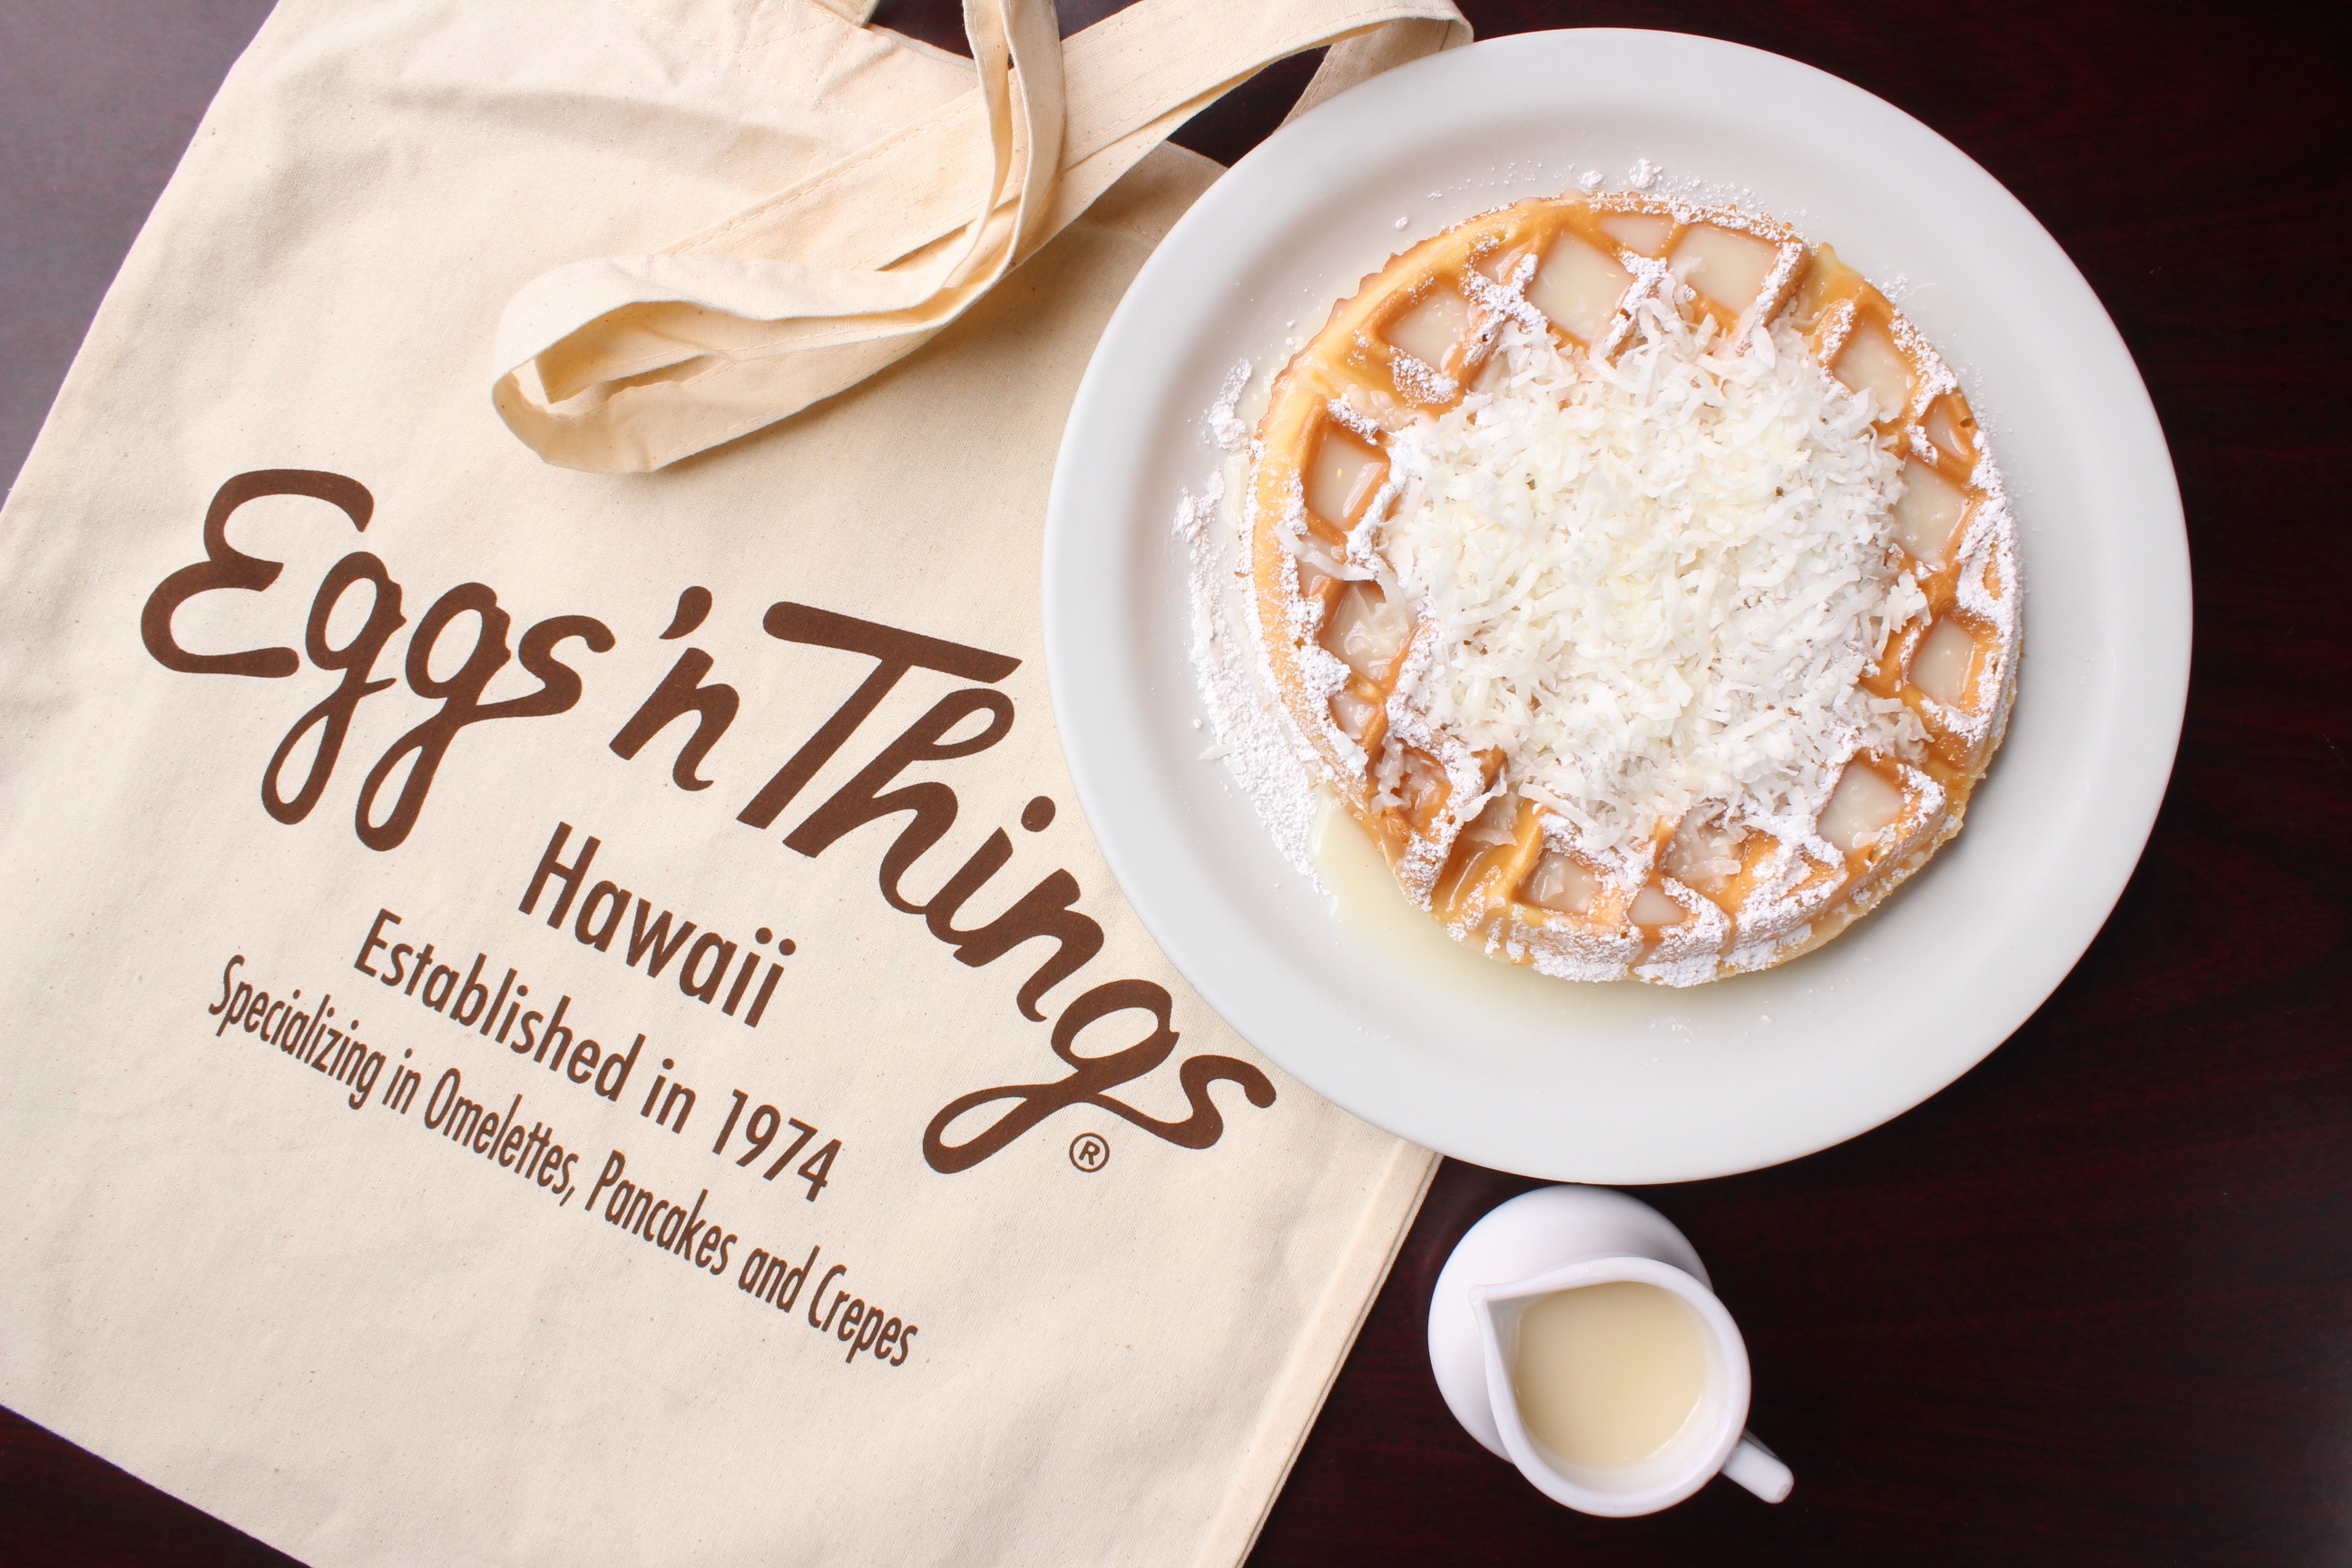 Free Coconut Mochi Waffle from Eggs 'N Things